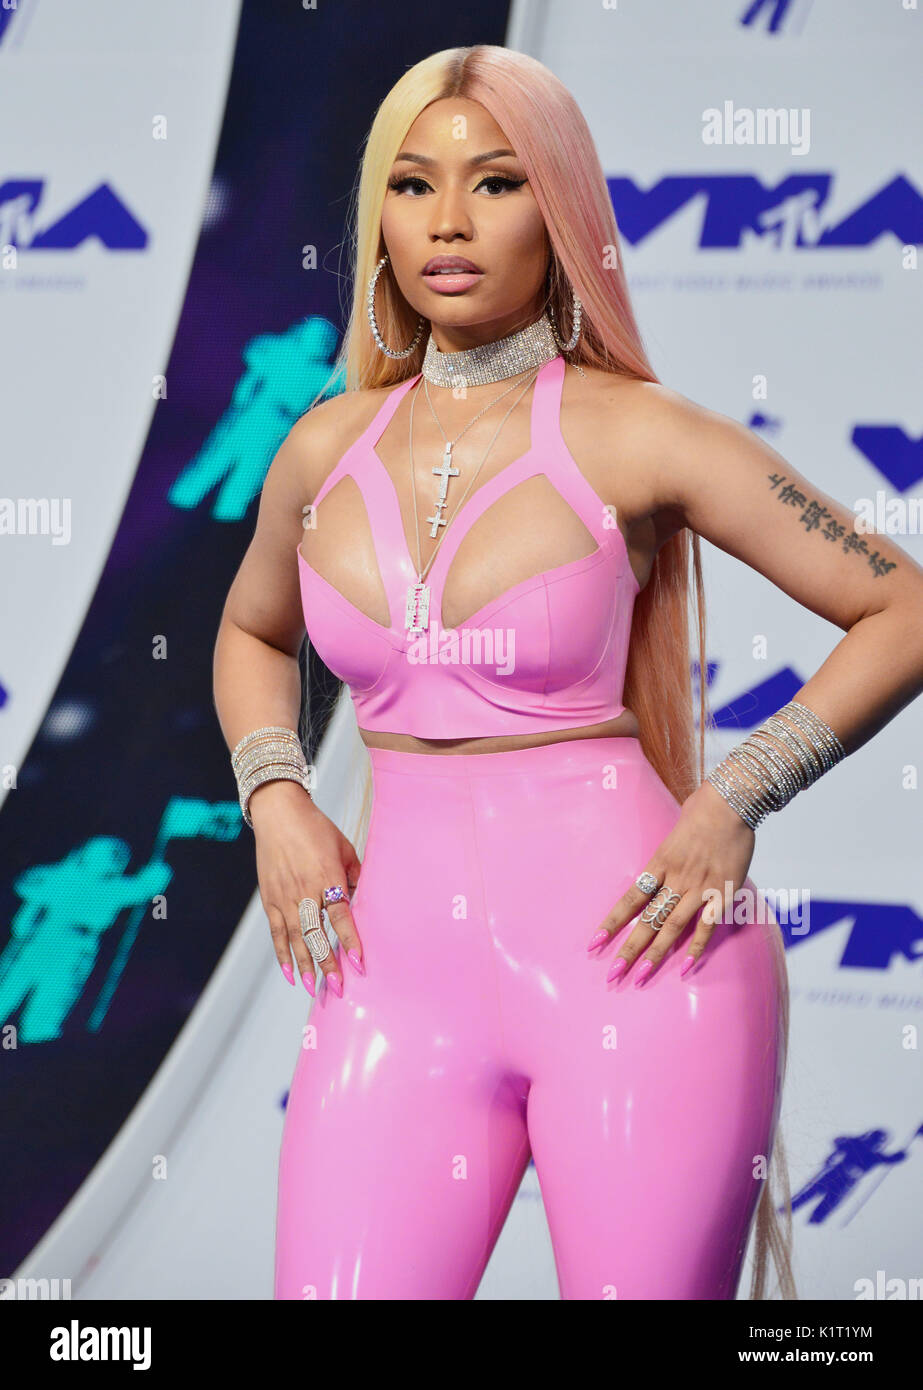 a - Nicki Minaj 047 arriving at the MTV VMA 2017 ( Music Awards ) at the Great Western Forum in Los Angeles. August 27, 2017. Stock Photo